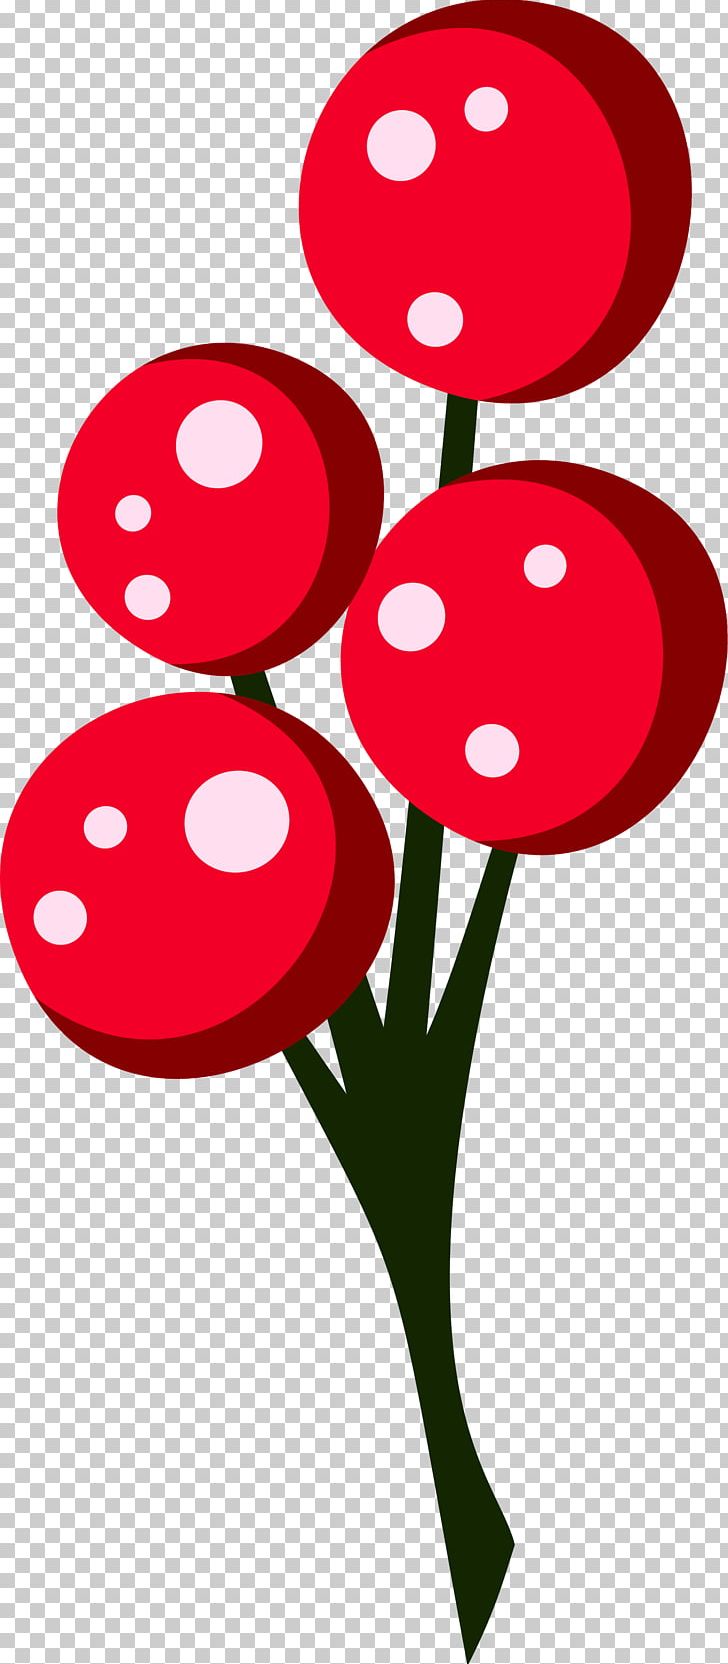 Cherry Red Fruit Illustration PNG, Clipart, Art, Branch, Cherry, Circle, Dig Free PNG Download